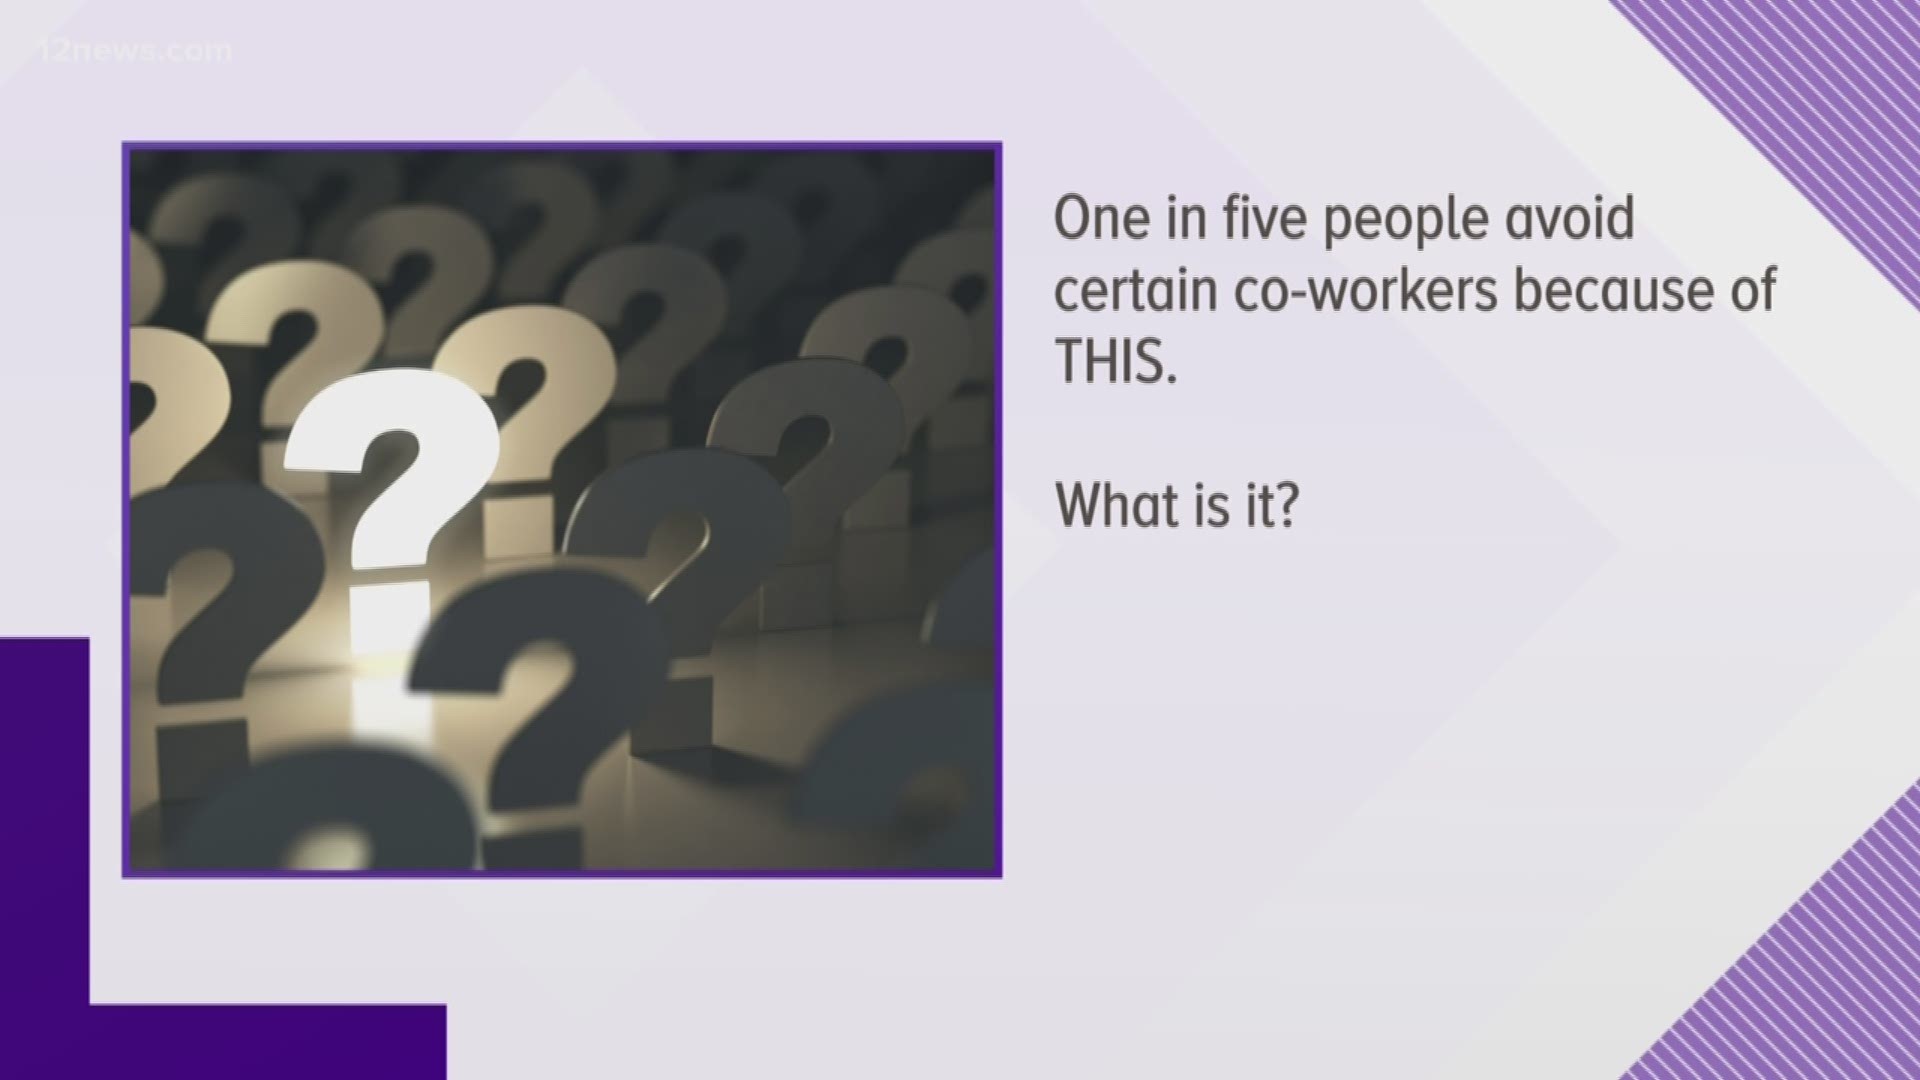 One in five people avoid certain co-workers because of THIS. What is it?